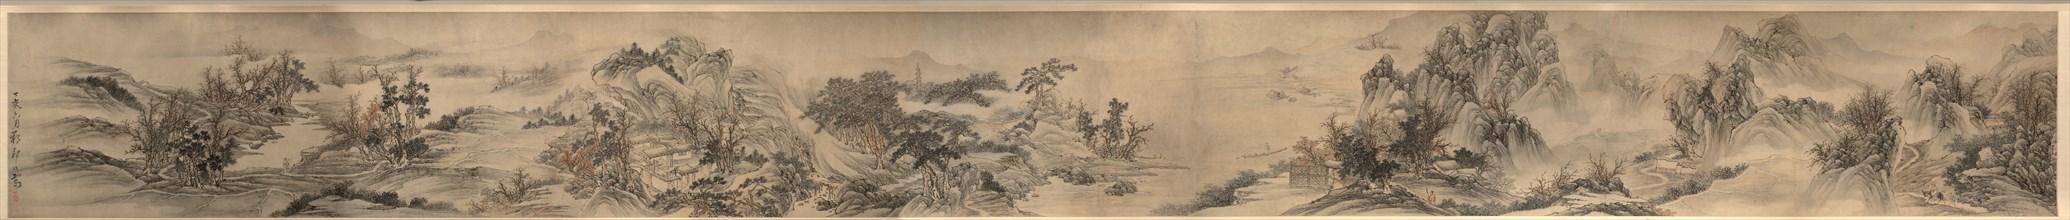 Autumn Mist in the Countryside, 1647. Creator: Zou Zhe (Chinese, c. 1610-before 1688).